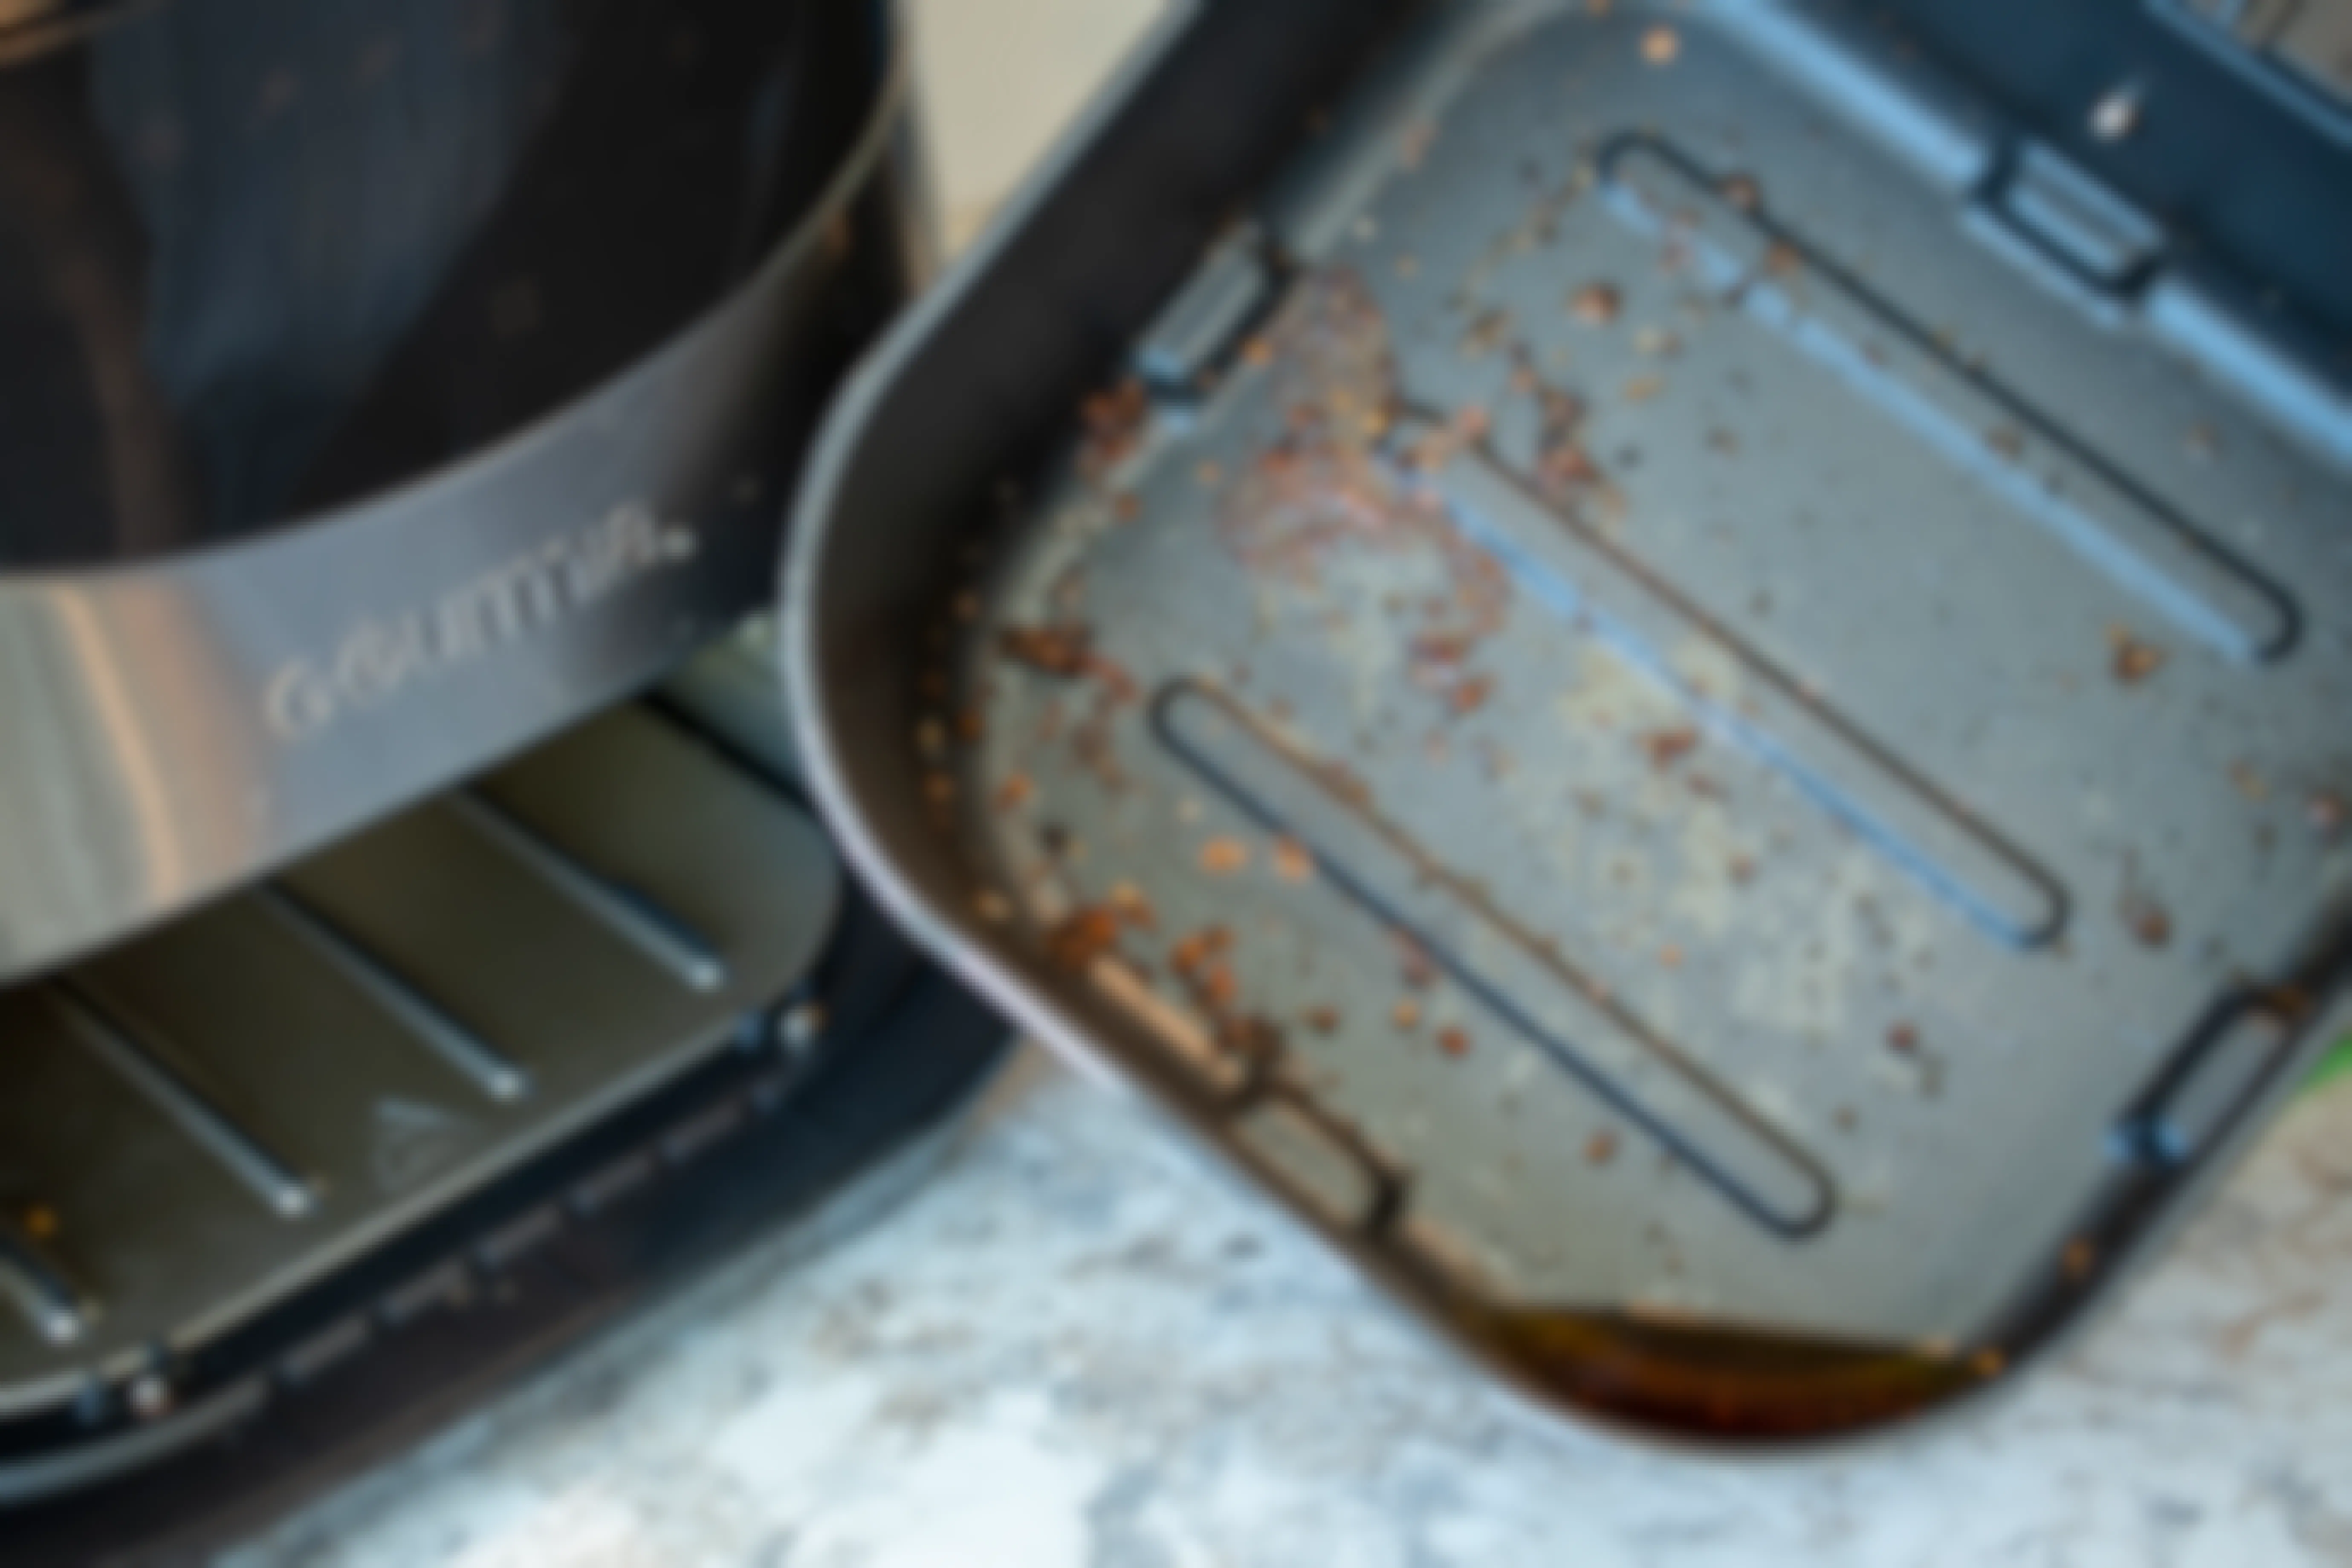 An air fryer with oil and food caked on the bottom of the pan